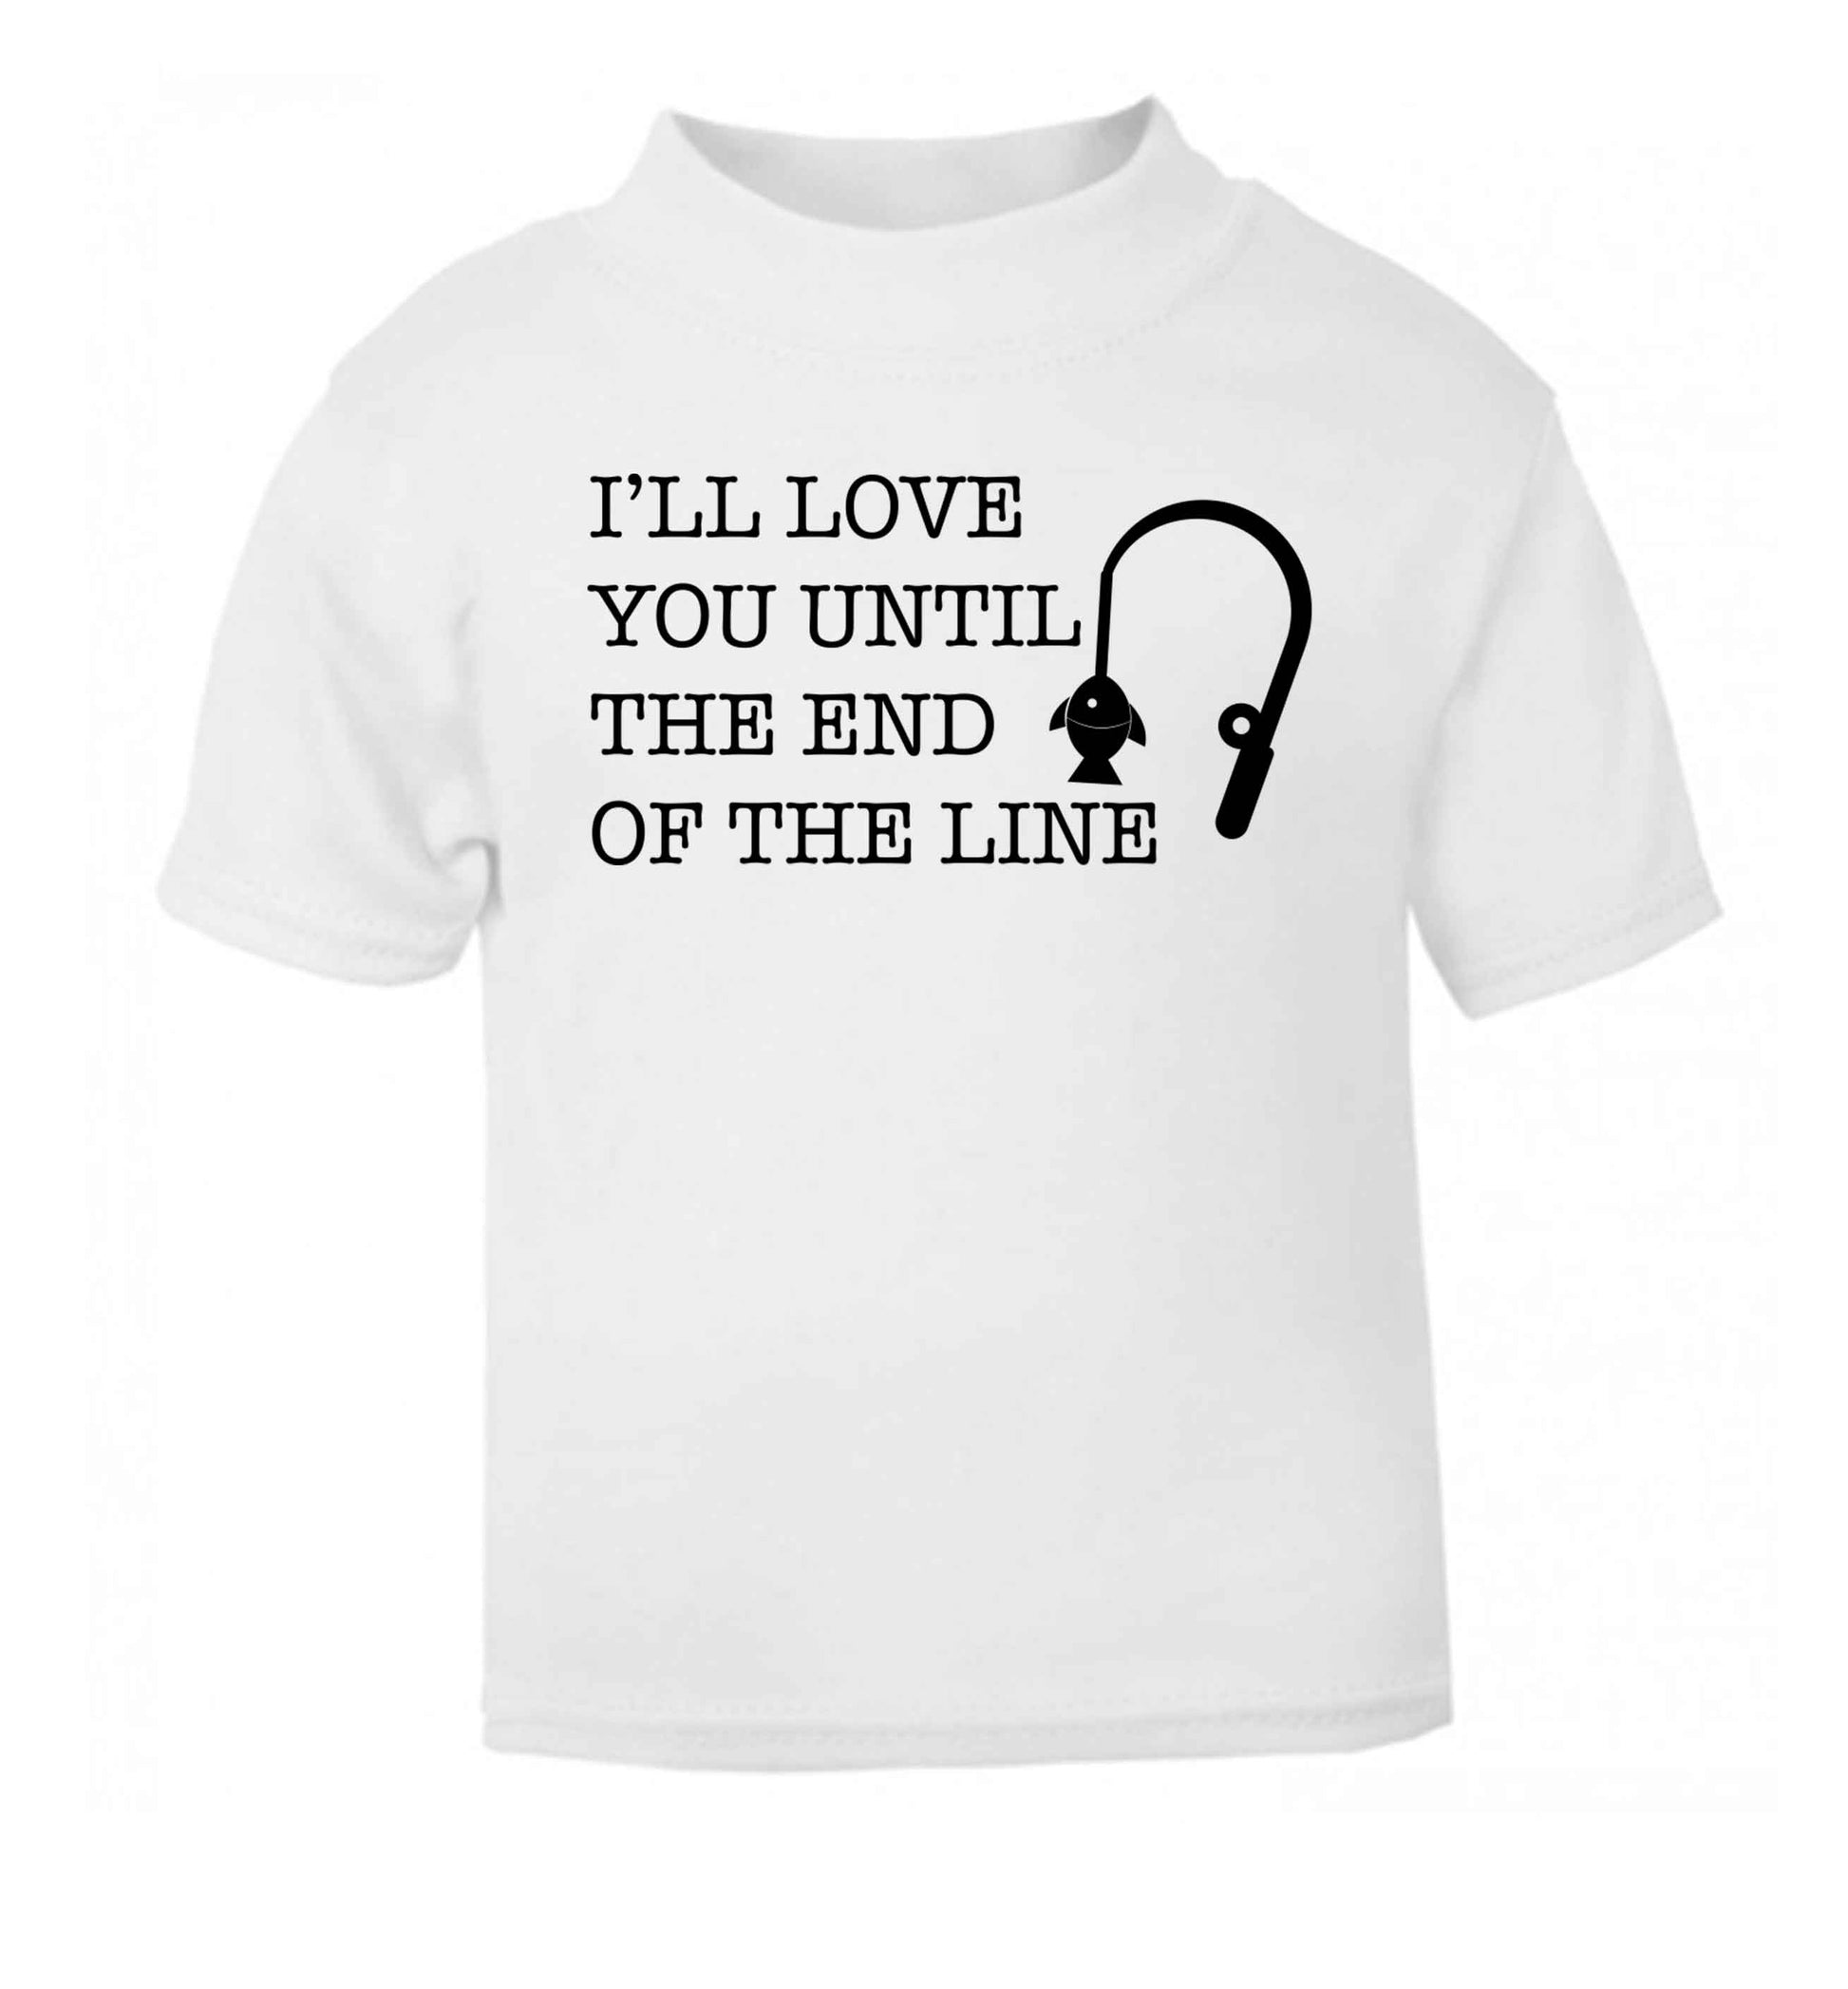 I'll love you until the end of the line white Baby Toddler Tshirt 2 Years